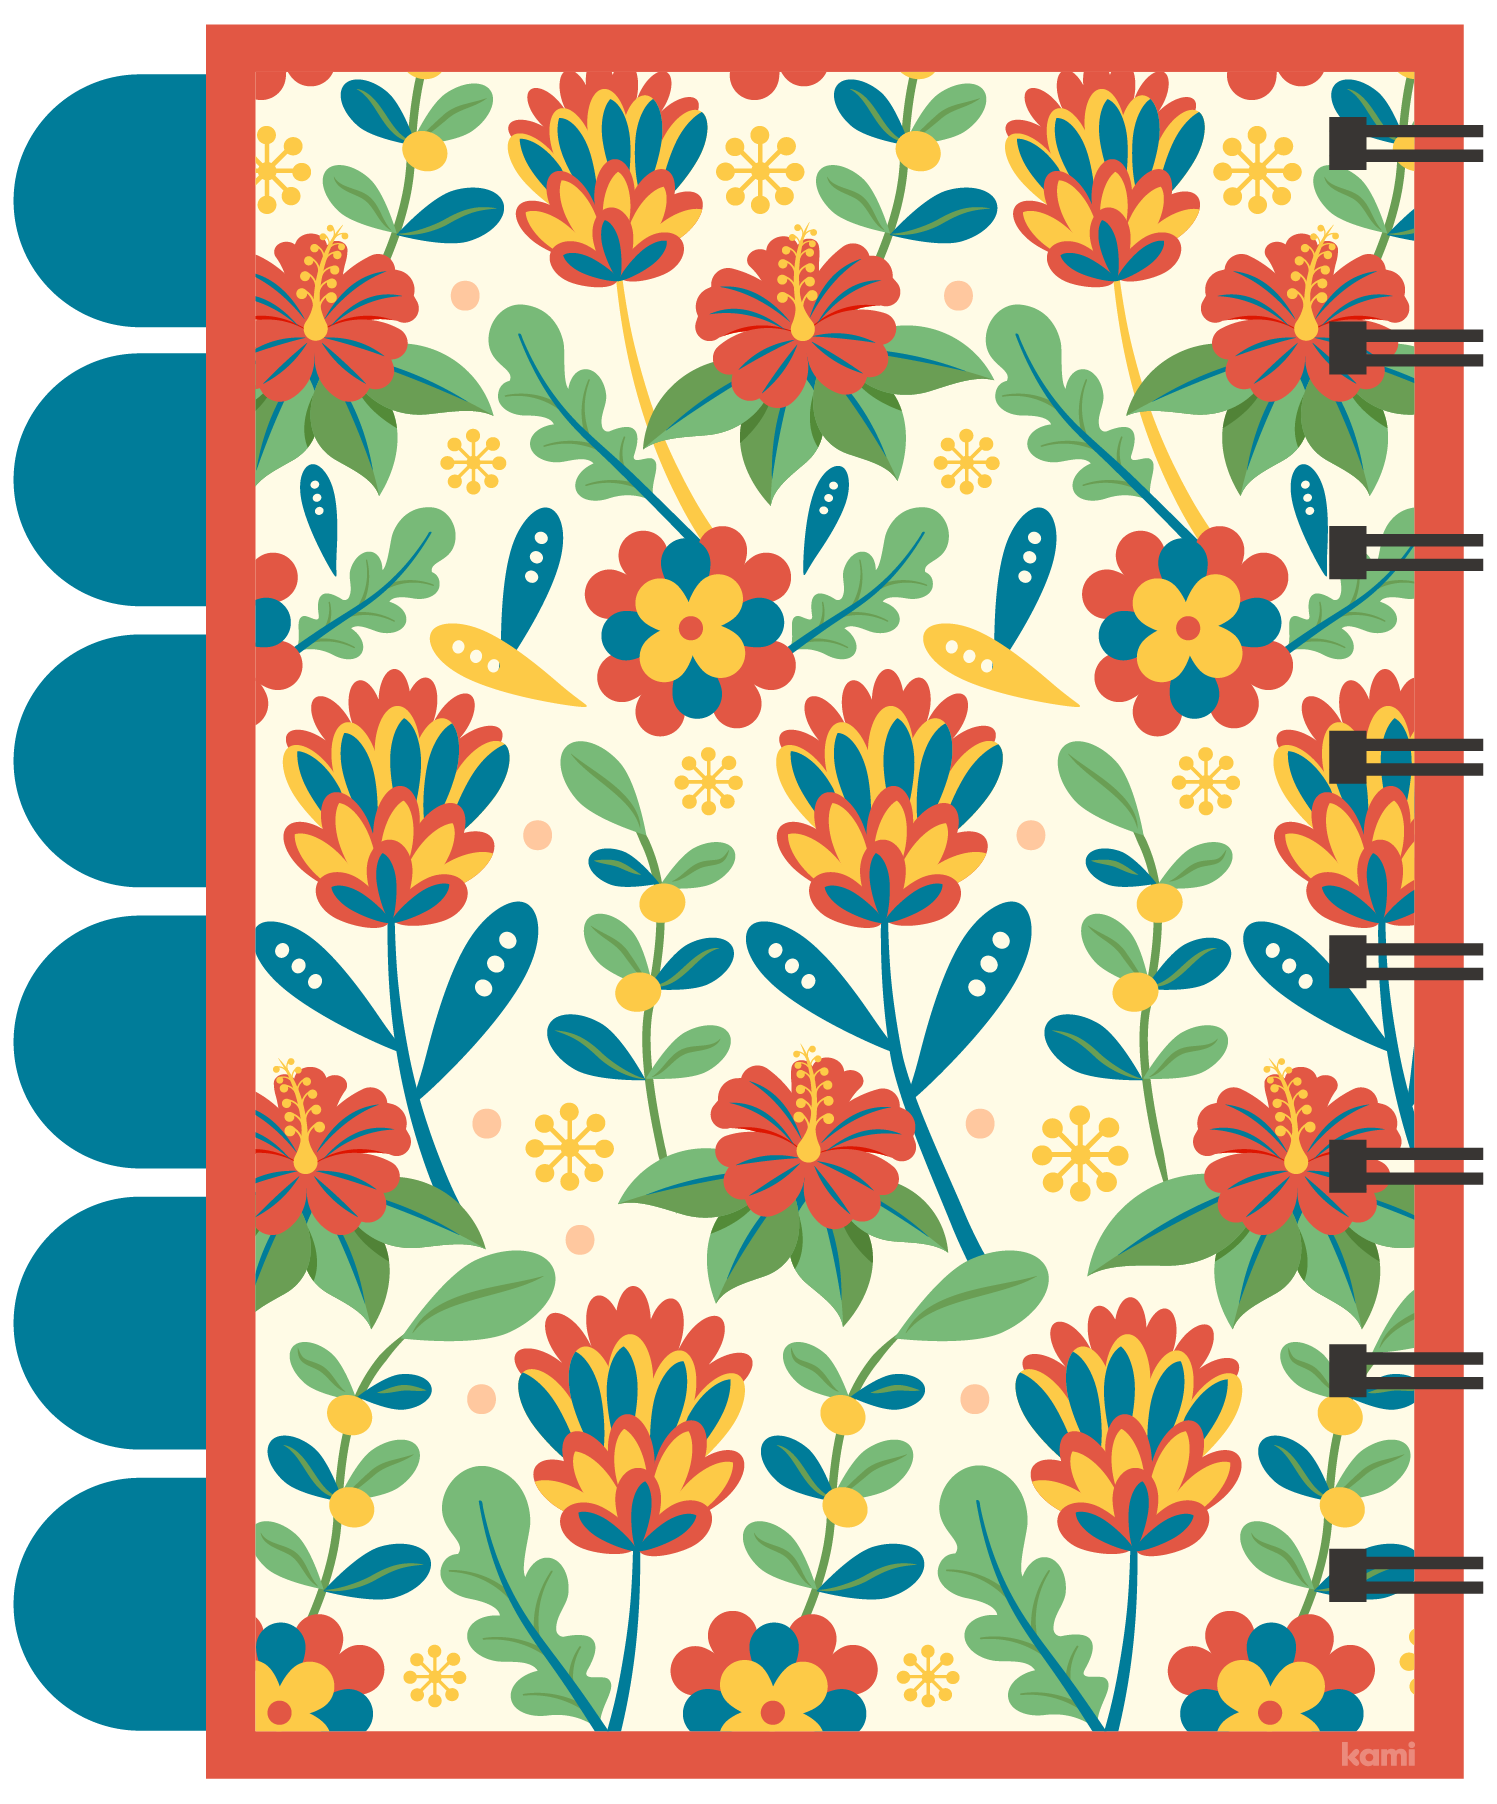 A digital notebook for students with a pattern lined design.